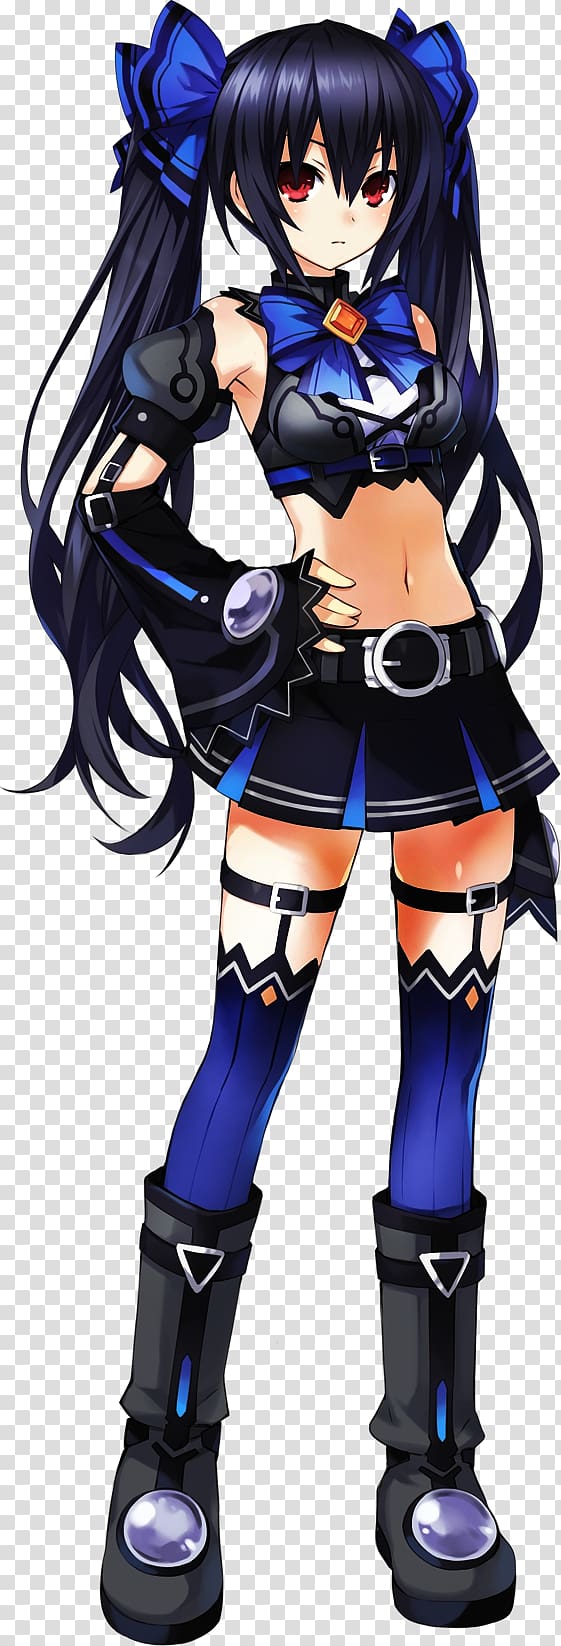 Hyperdimension Neptunia Victory Hyperdevotion Noire: Goddess Black Heart Hyperdimension Neptunia: Producing Perfection Cyberdimension Neptunia: 4 Goddesses Online, granny video game transparent background PNG clipart